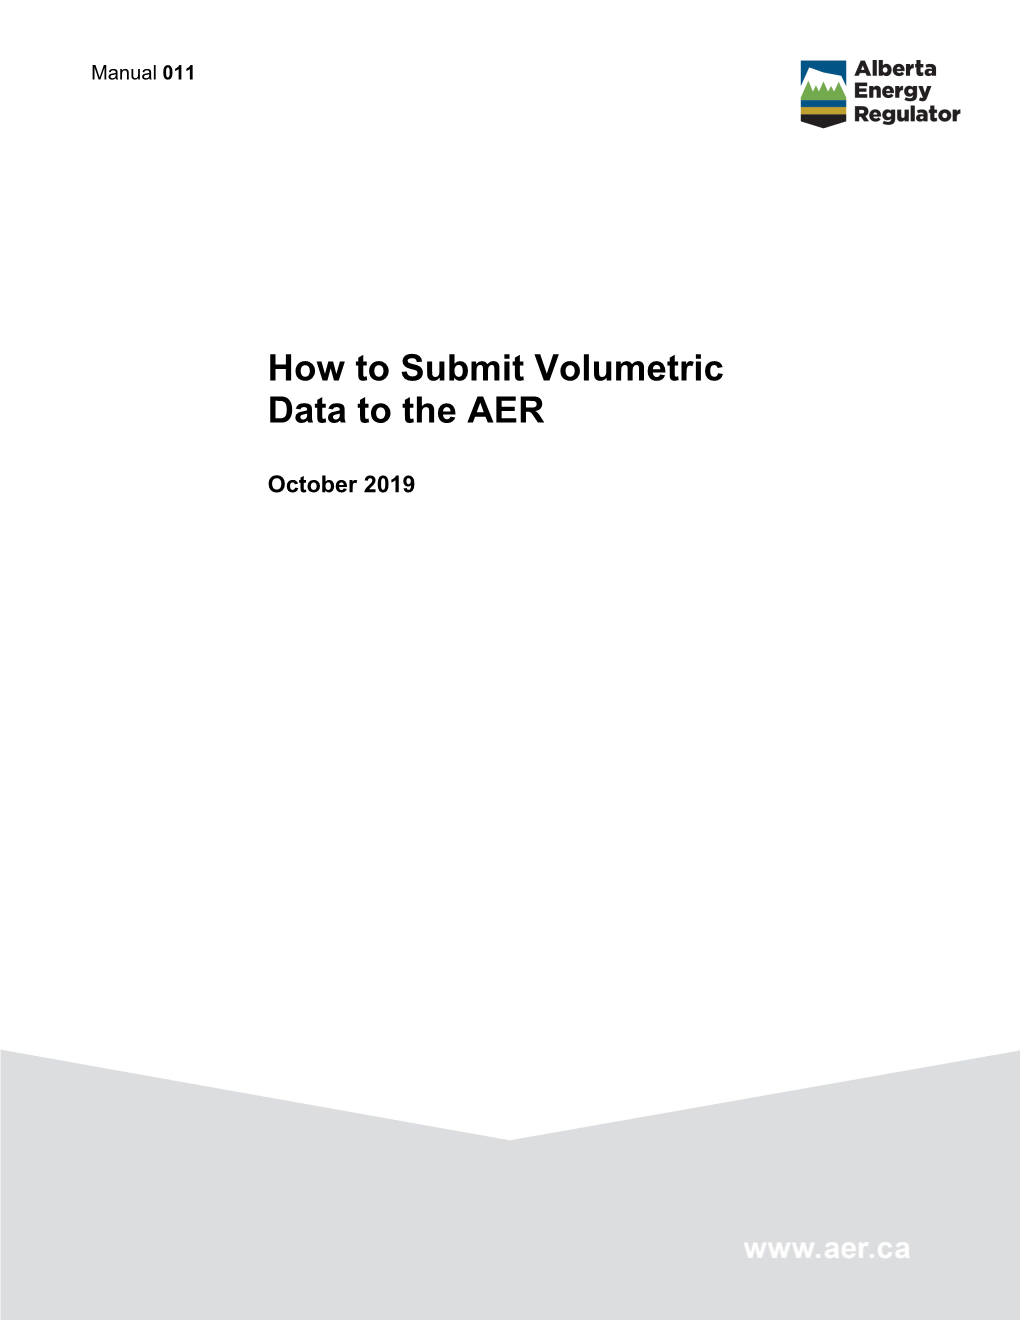 How to Submit Volumetric Data to the AER